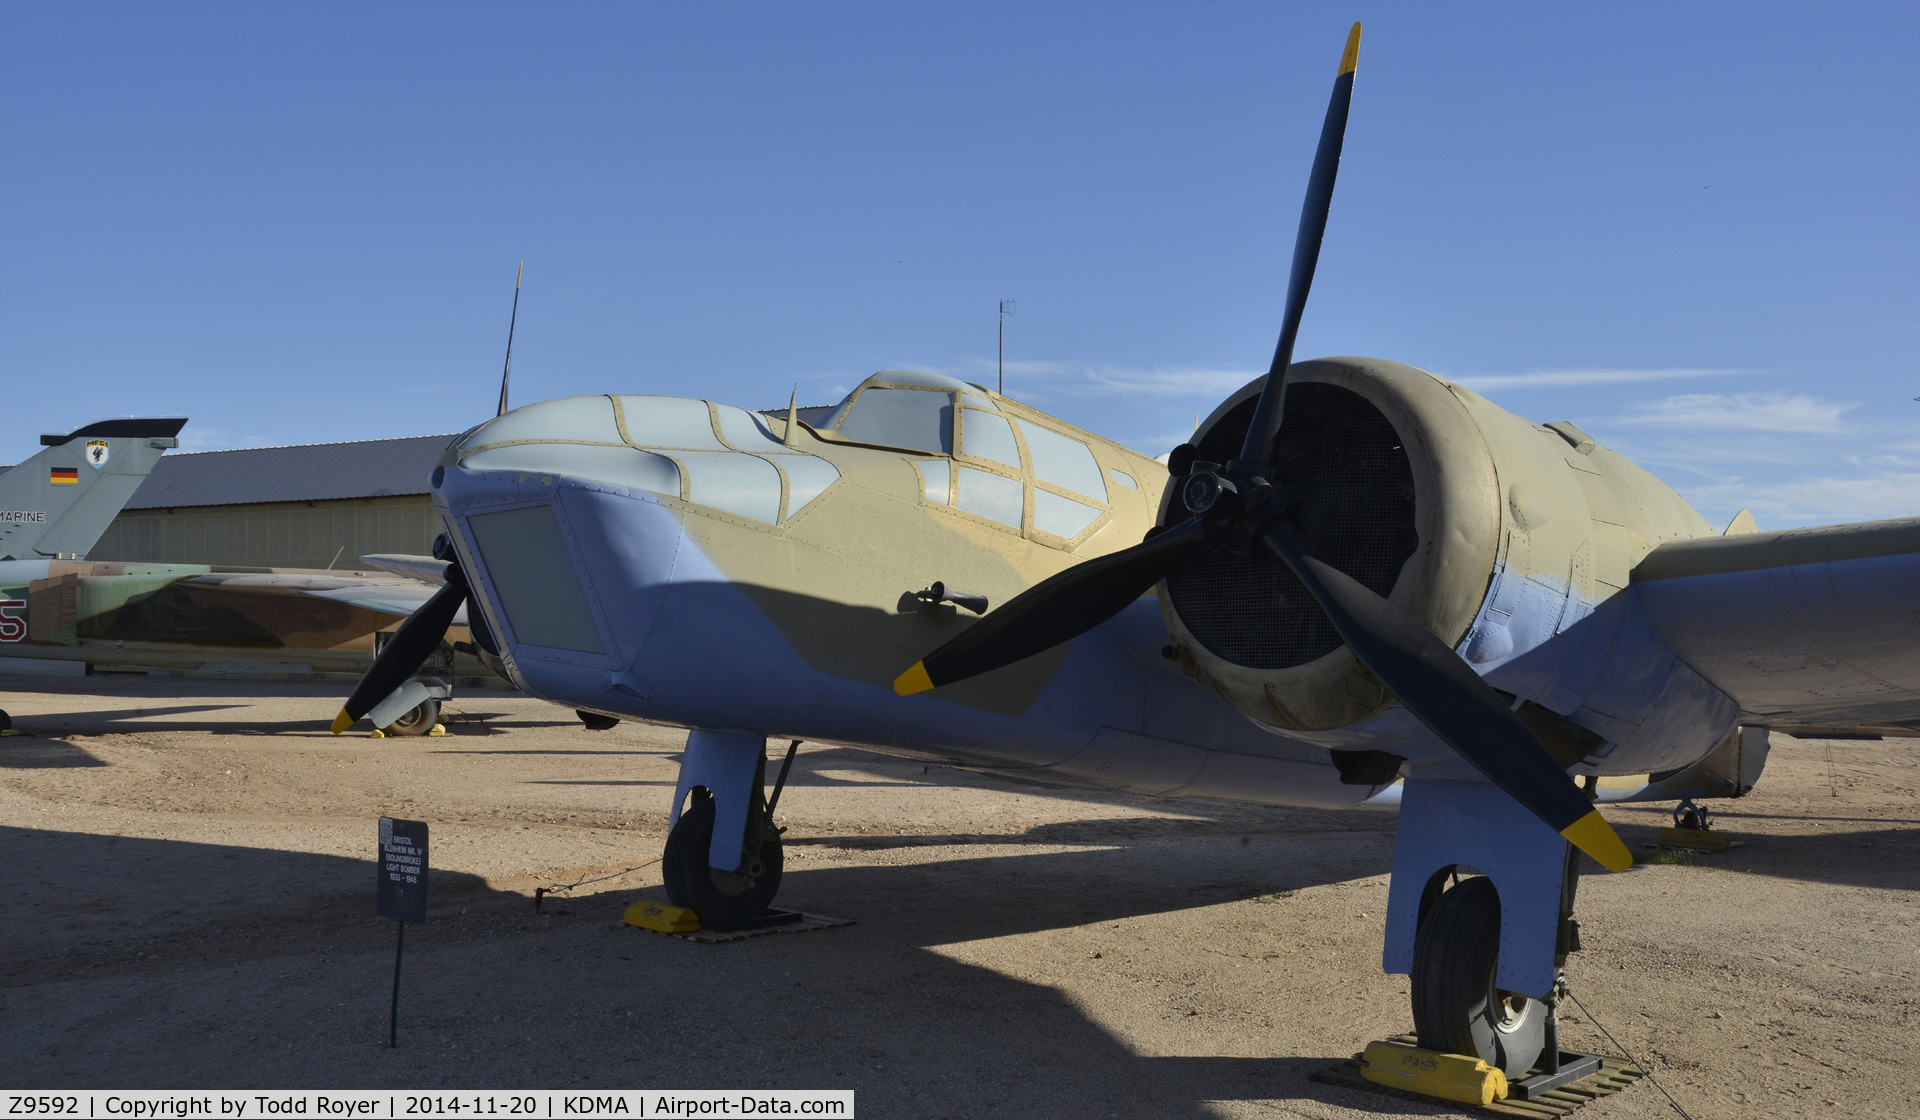 Z9592, Bristol 149 Bolingbroke Mk.IVT C/N Not found Z9592, On display at the Pima Air and Space Museum